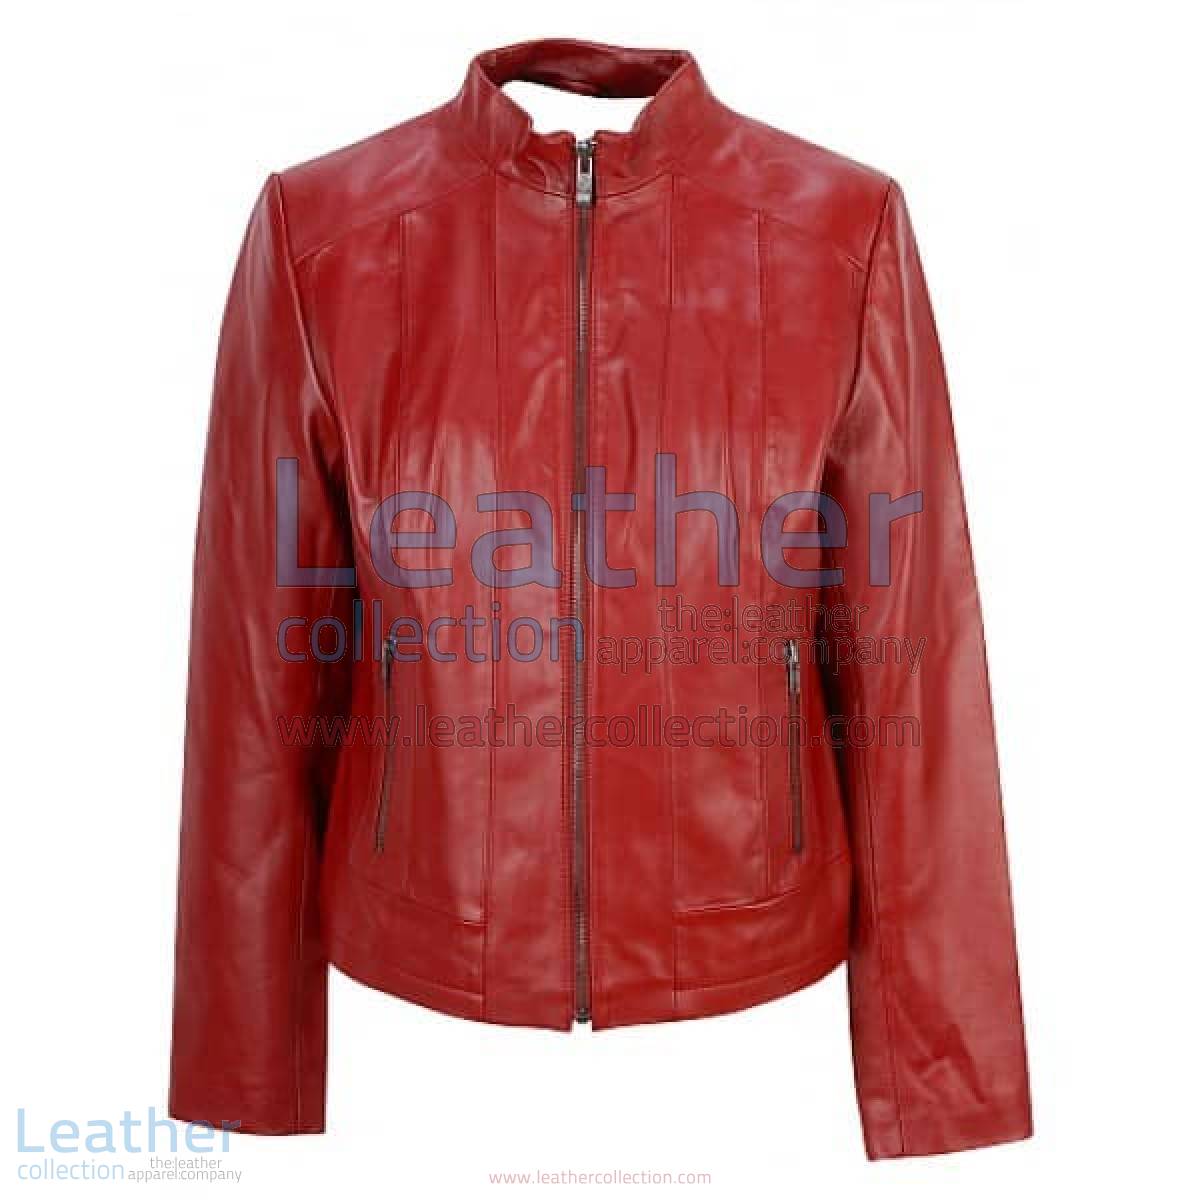 Red Fashion Jacket of Leather | red jacket